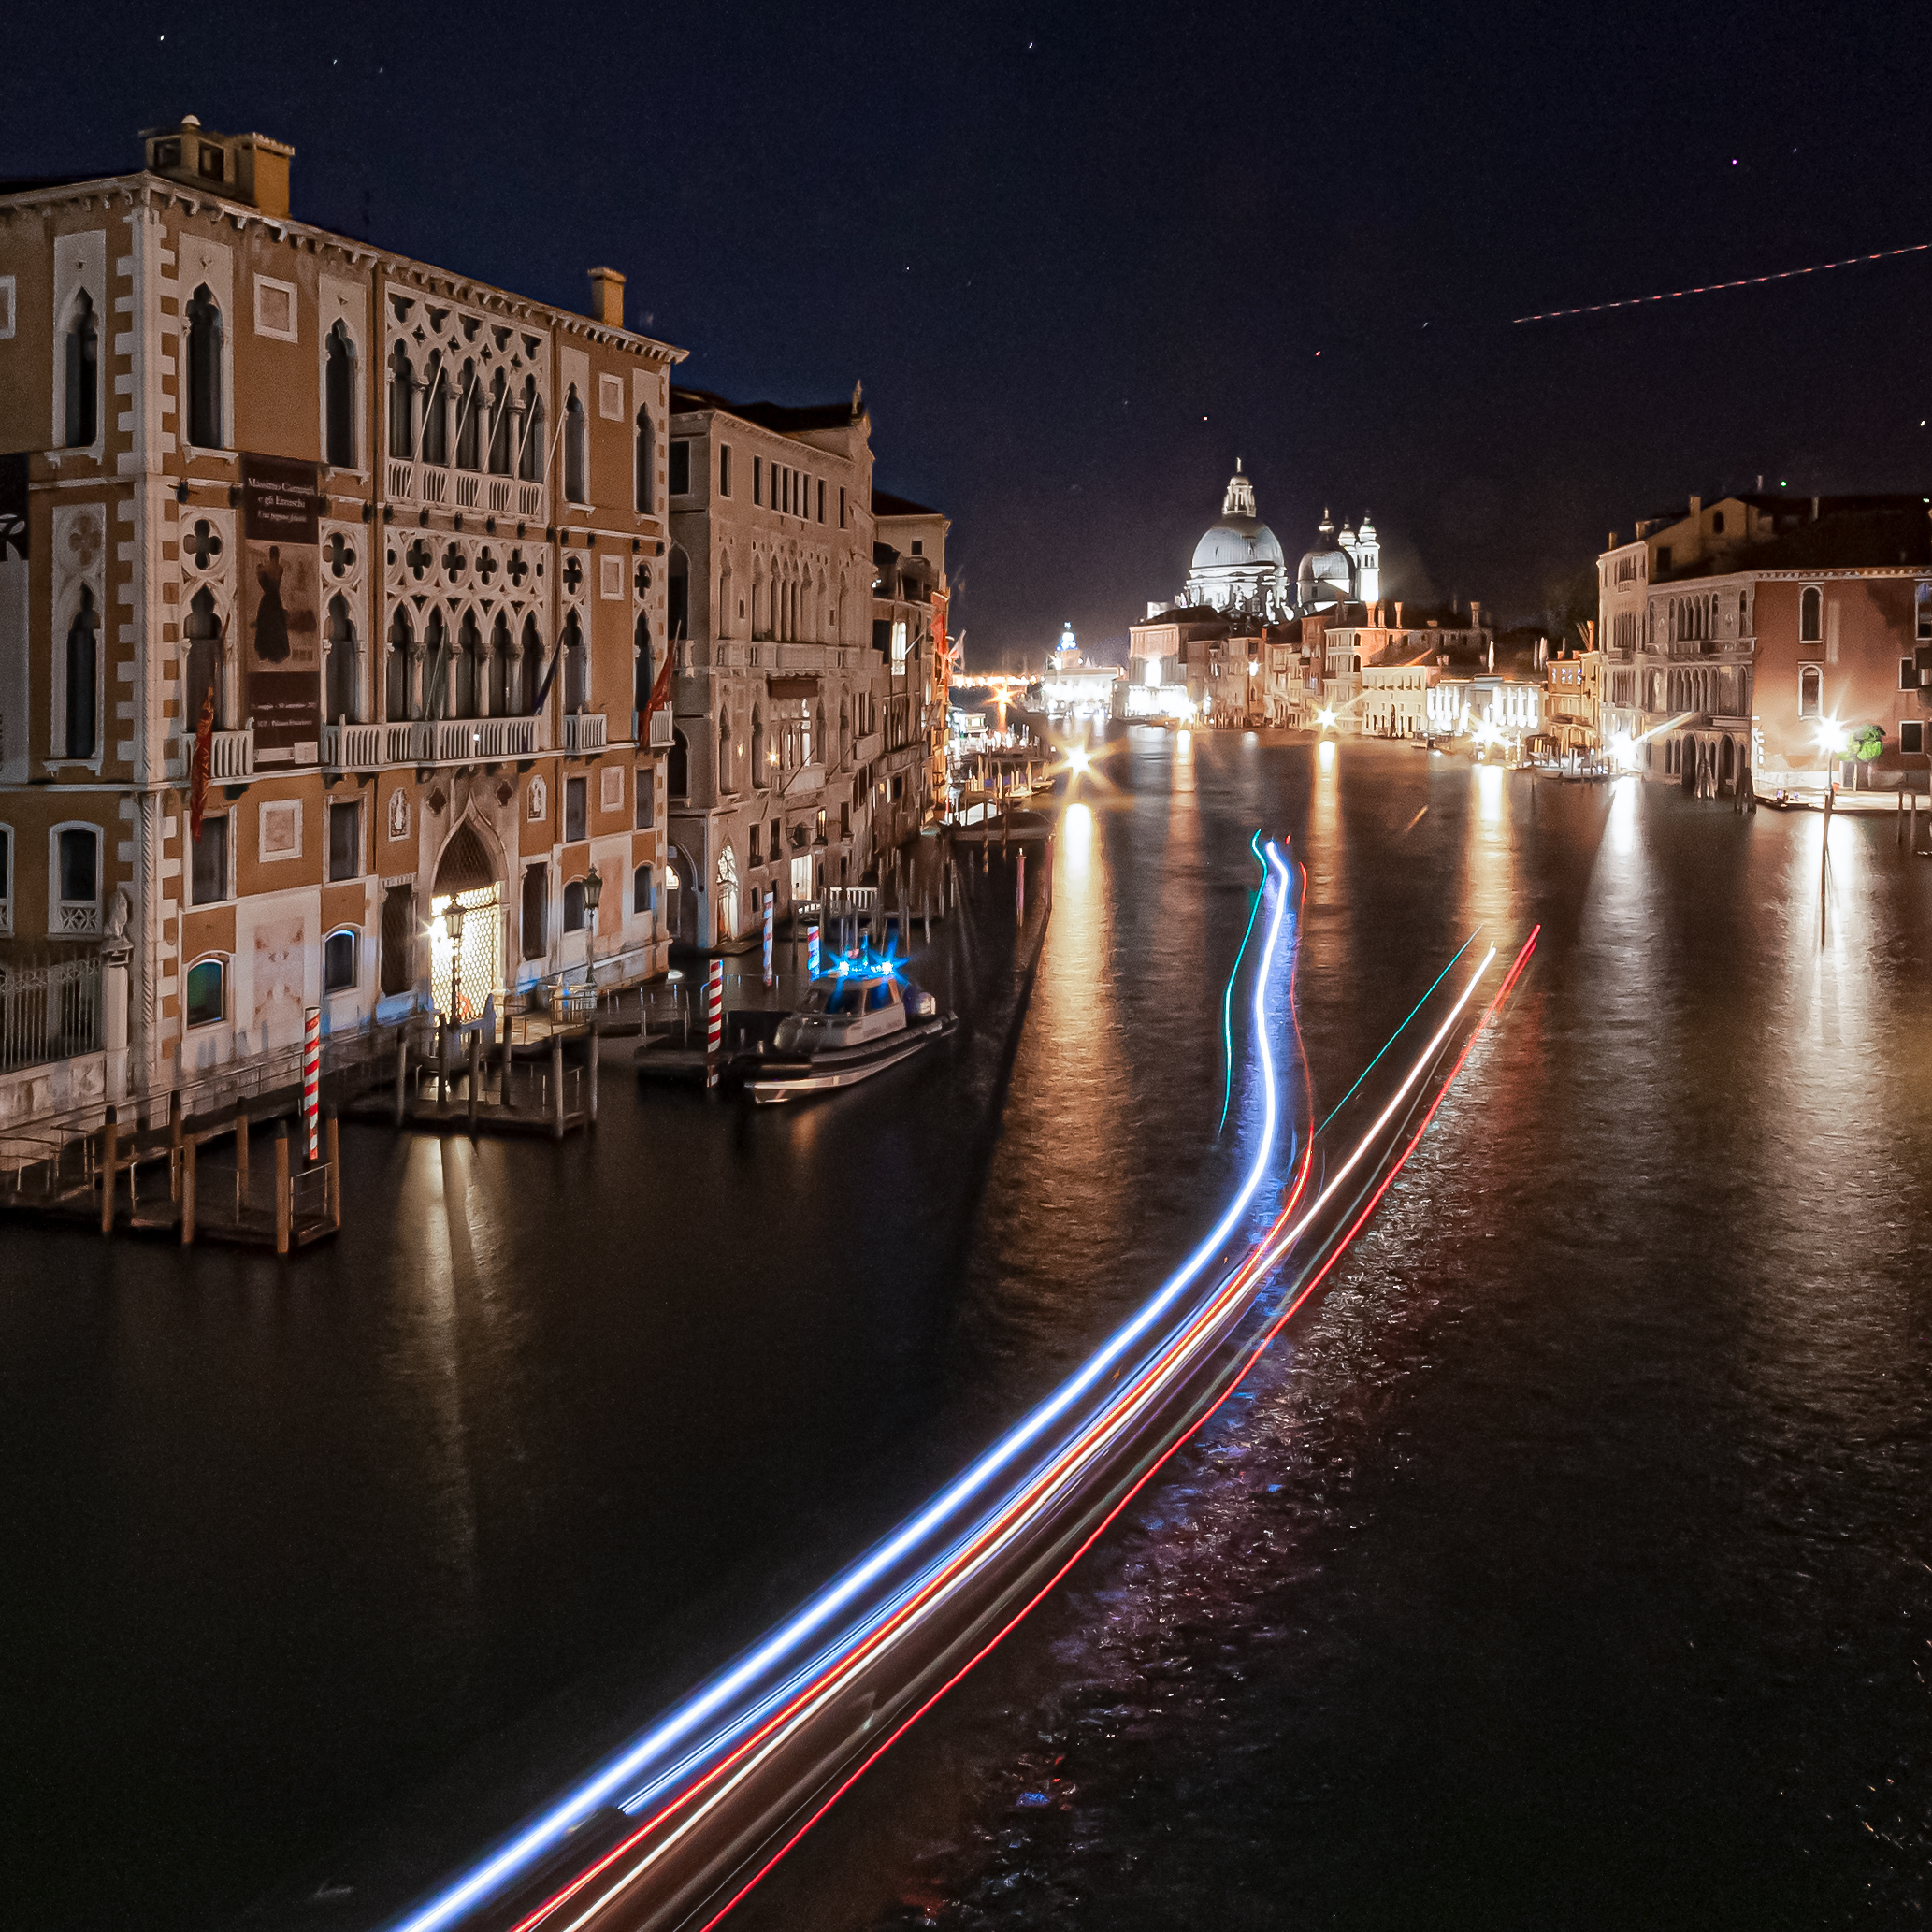 from the Accademia Bridge...